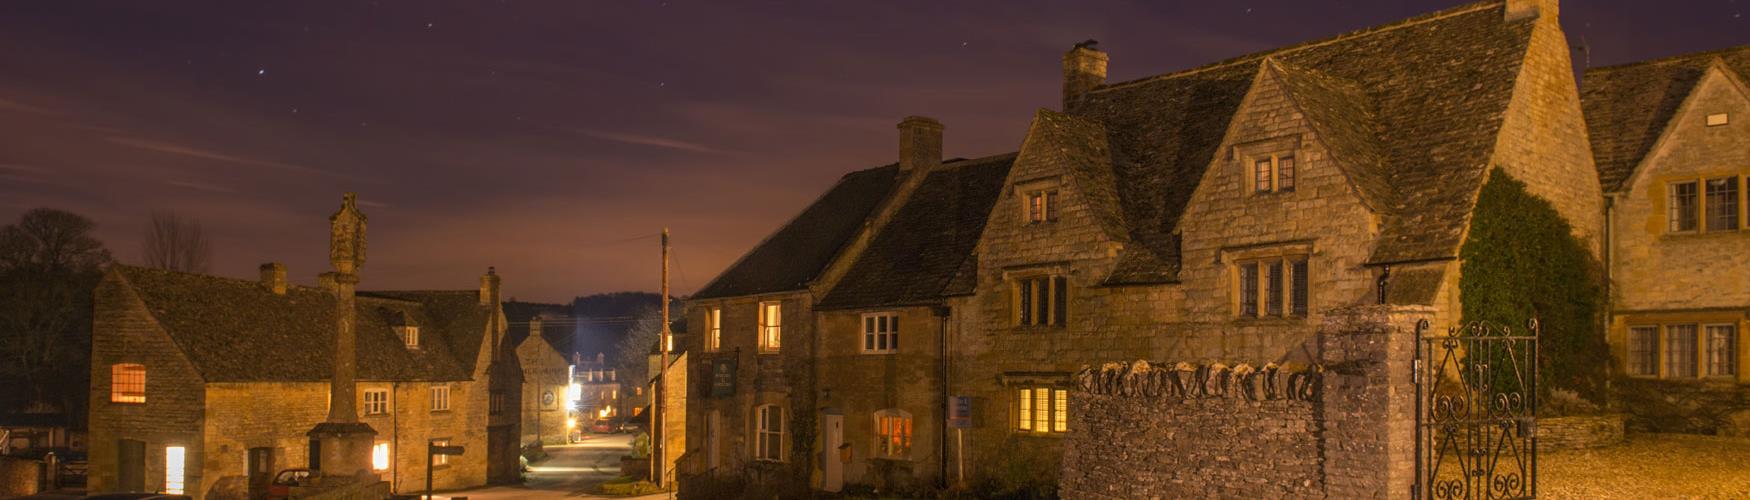 Another perfect night in the Cotswolds 
(Guiting Power - photo by The Picture Taker)